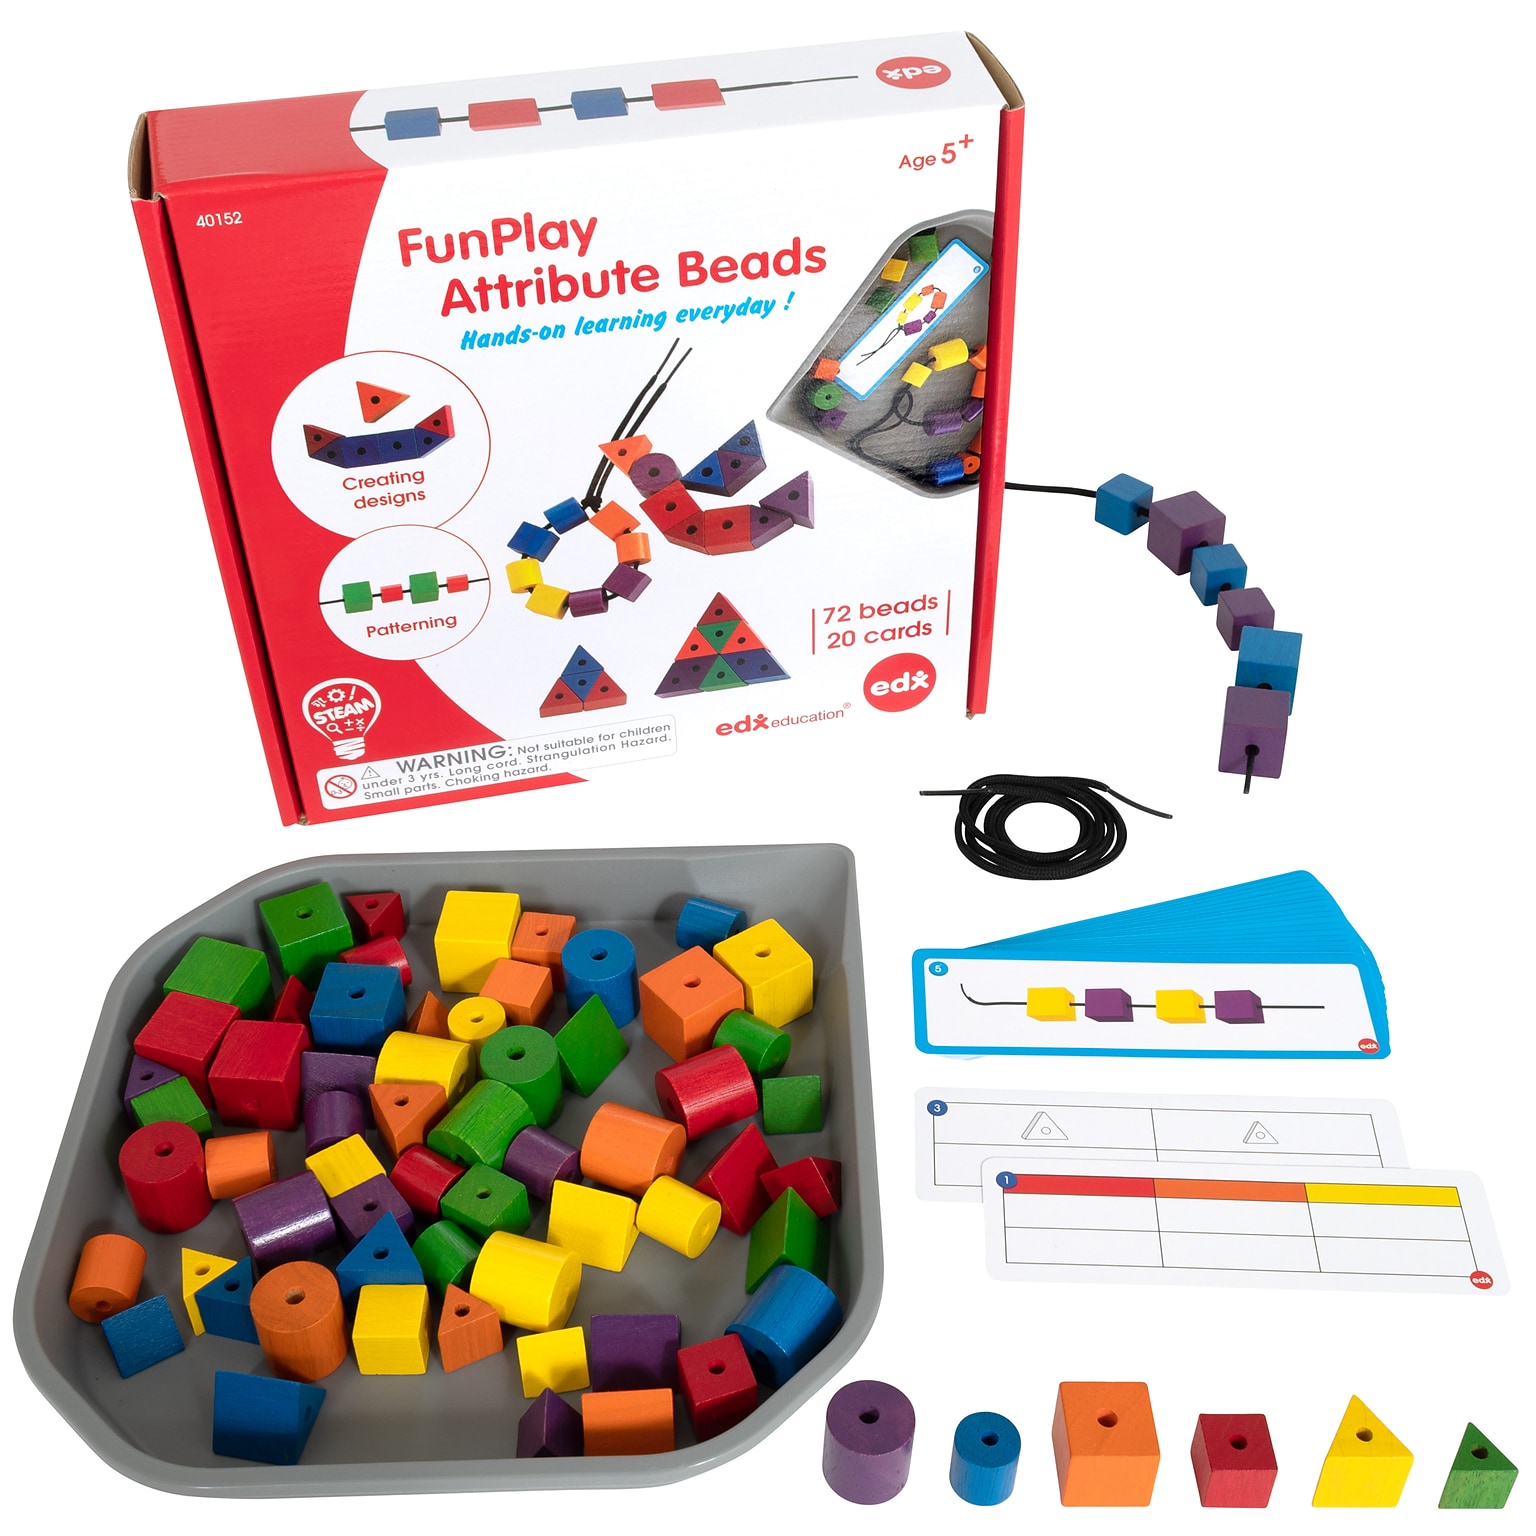 Edx Education FunPlay Attribute Beads, Assorted Colors (CTU40152)